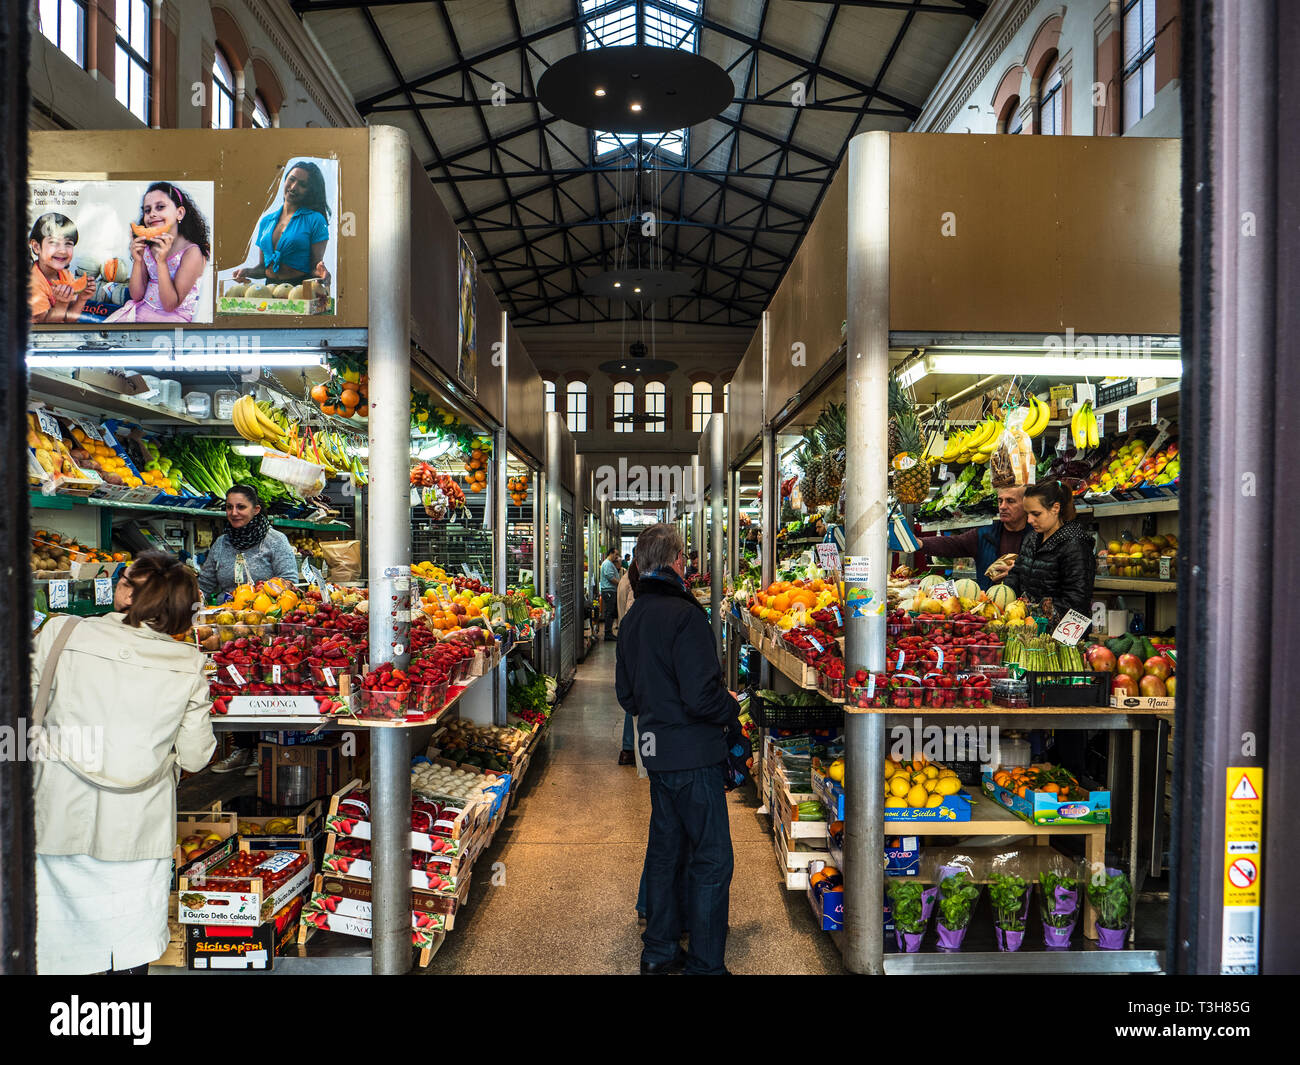 Mercato delle Erbe Bologna - largest covered market in the historical city center, sells fruits and vegetables, meat, cheese, wine with a food court. Stock Photo